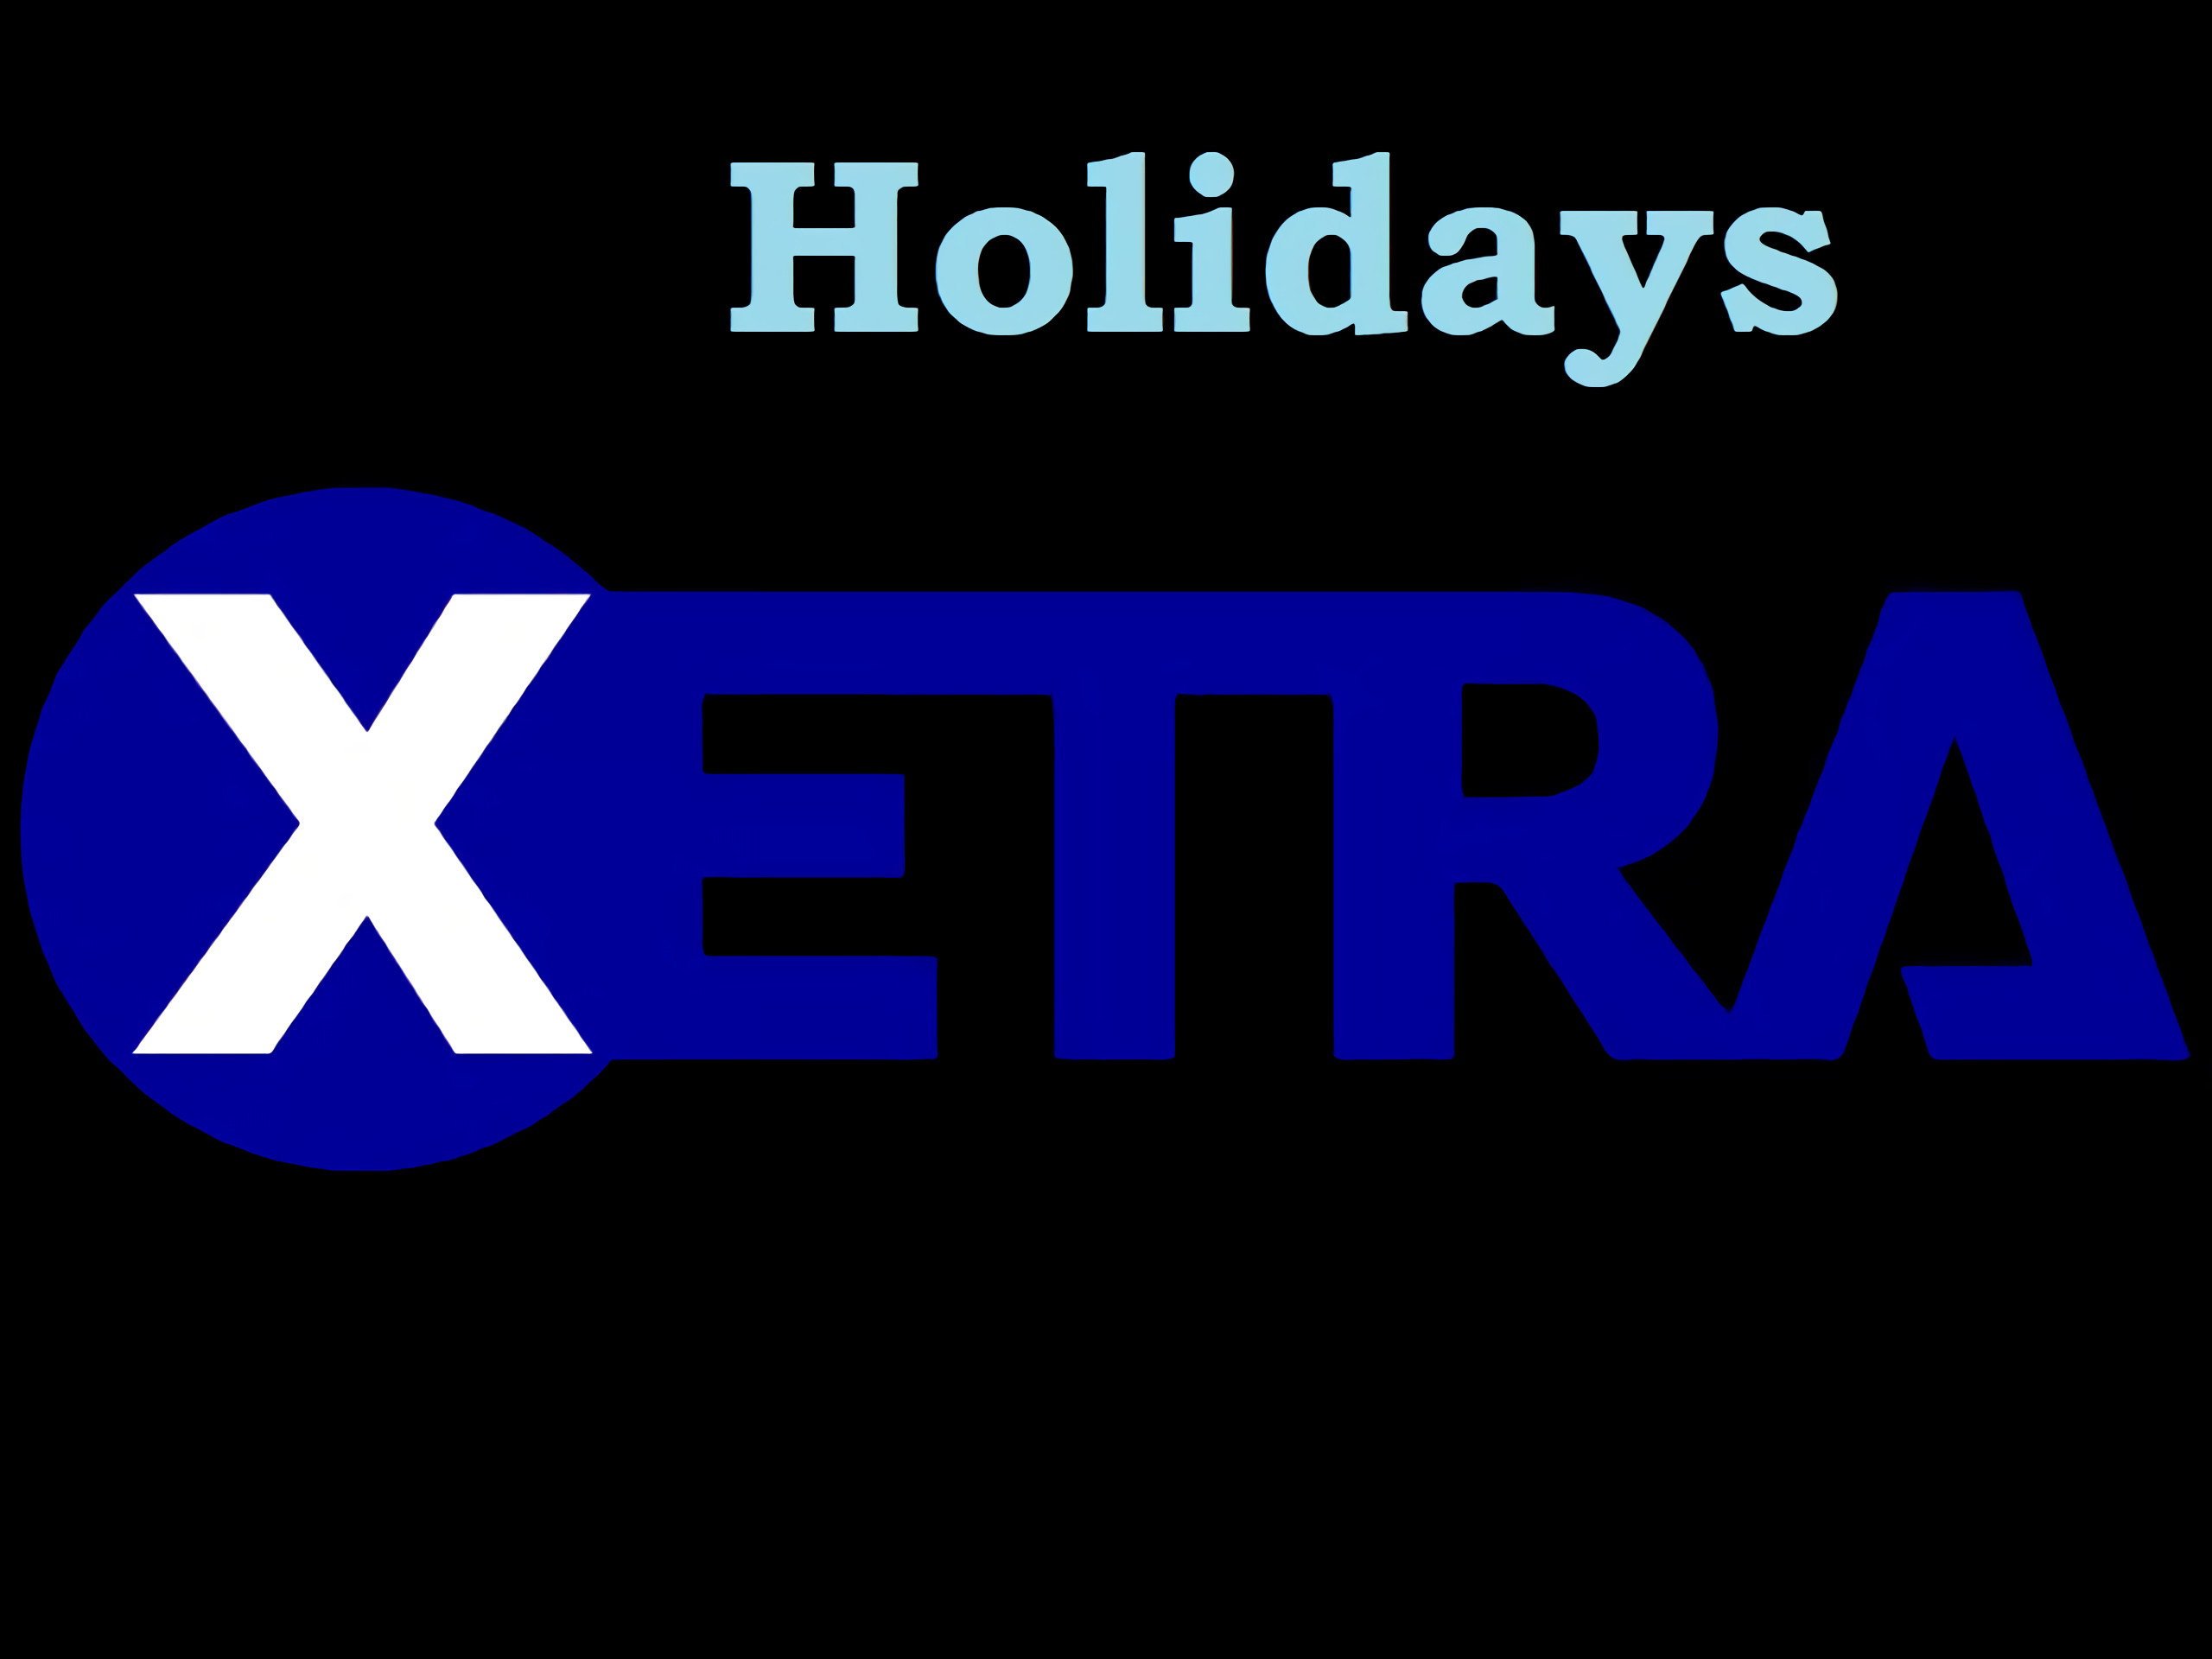 xetr trading holidays in 2023